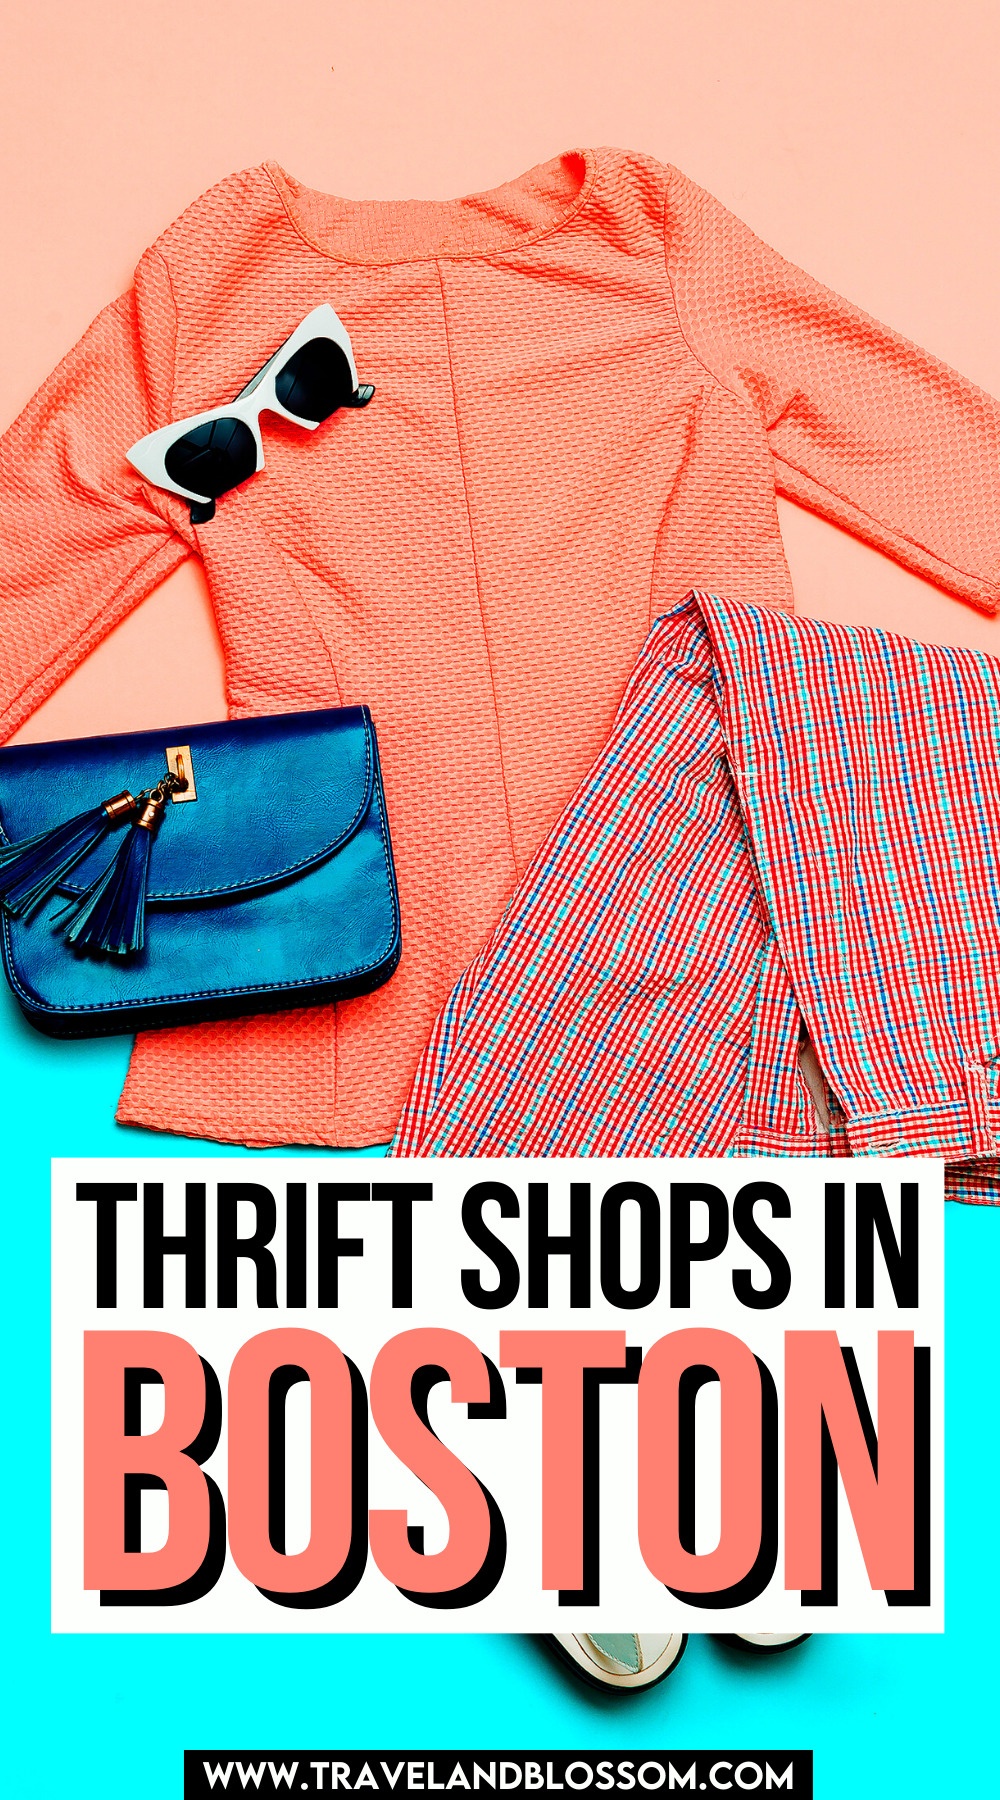 The 7 Best Thrift Stores in Boston for Vintage